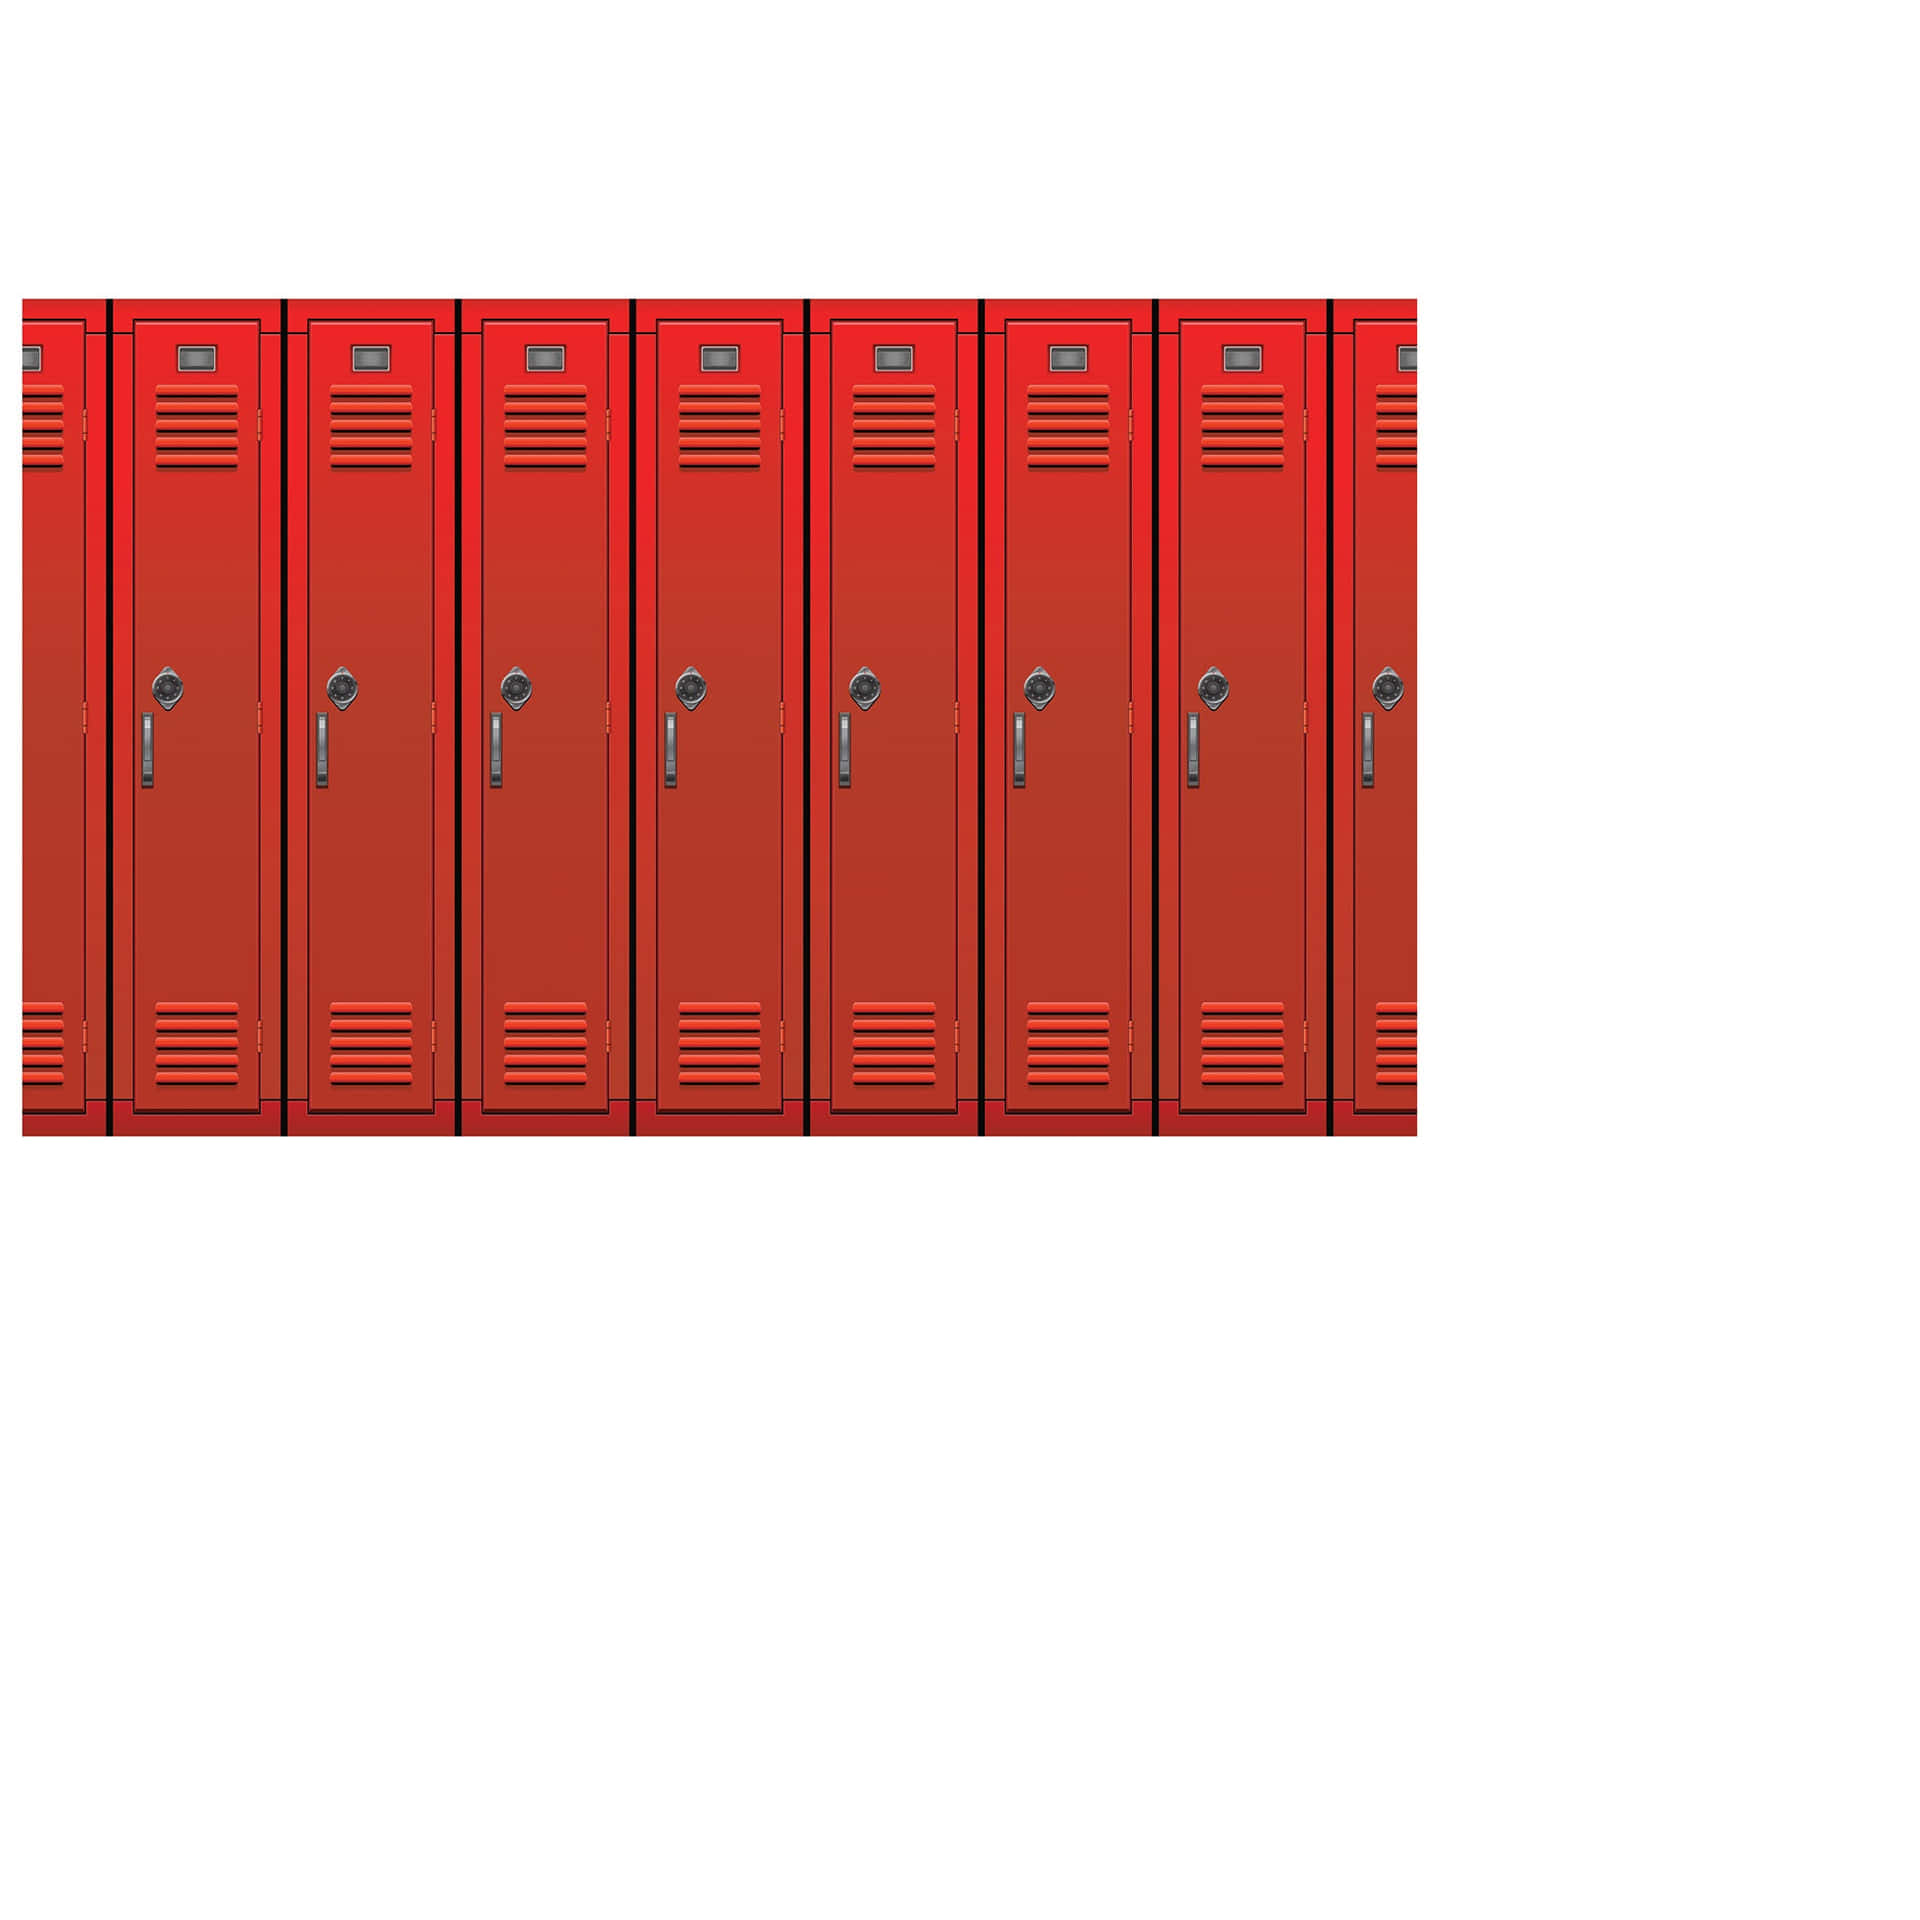 Red Lockers On A White Background